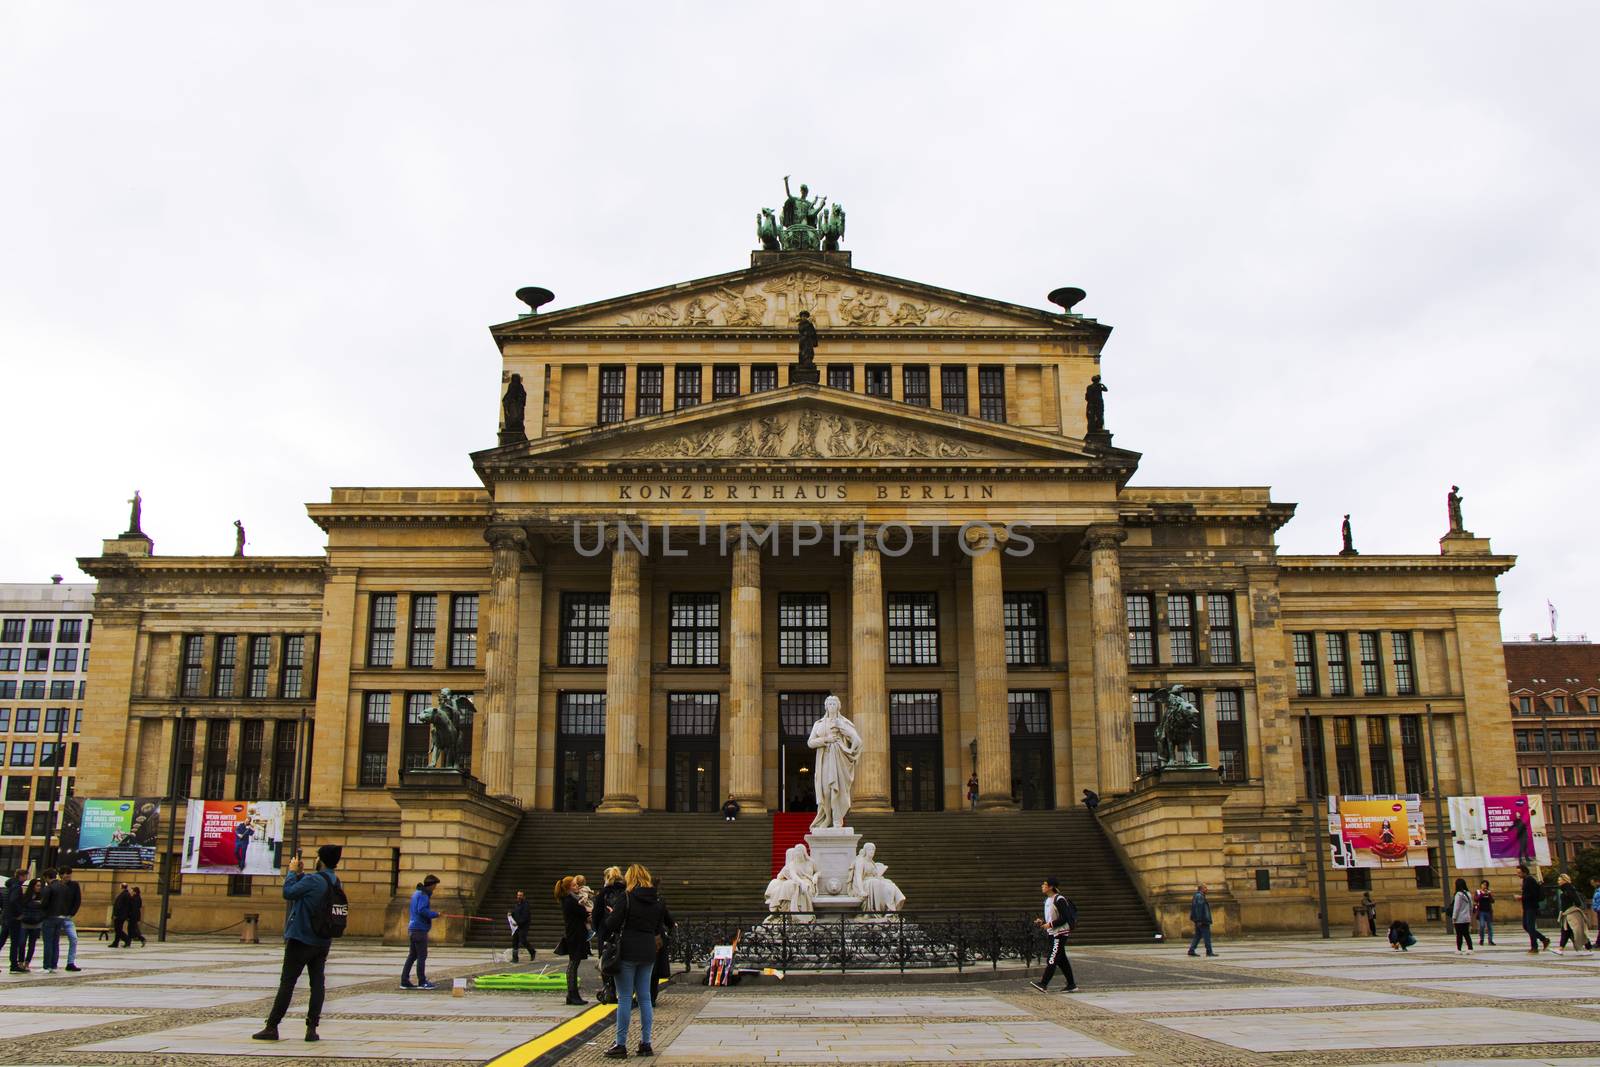 Konzerthaus Berlin, located on Gendarmenmarkt square near the historic center of the city, concert hall. by Taidundua